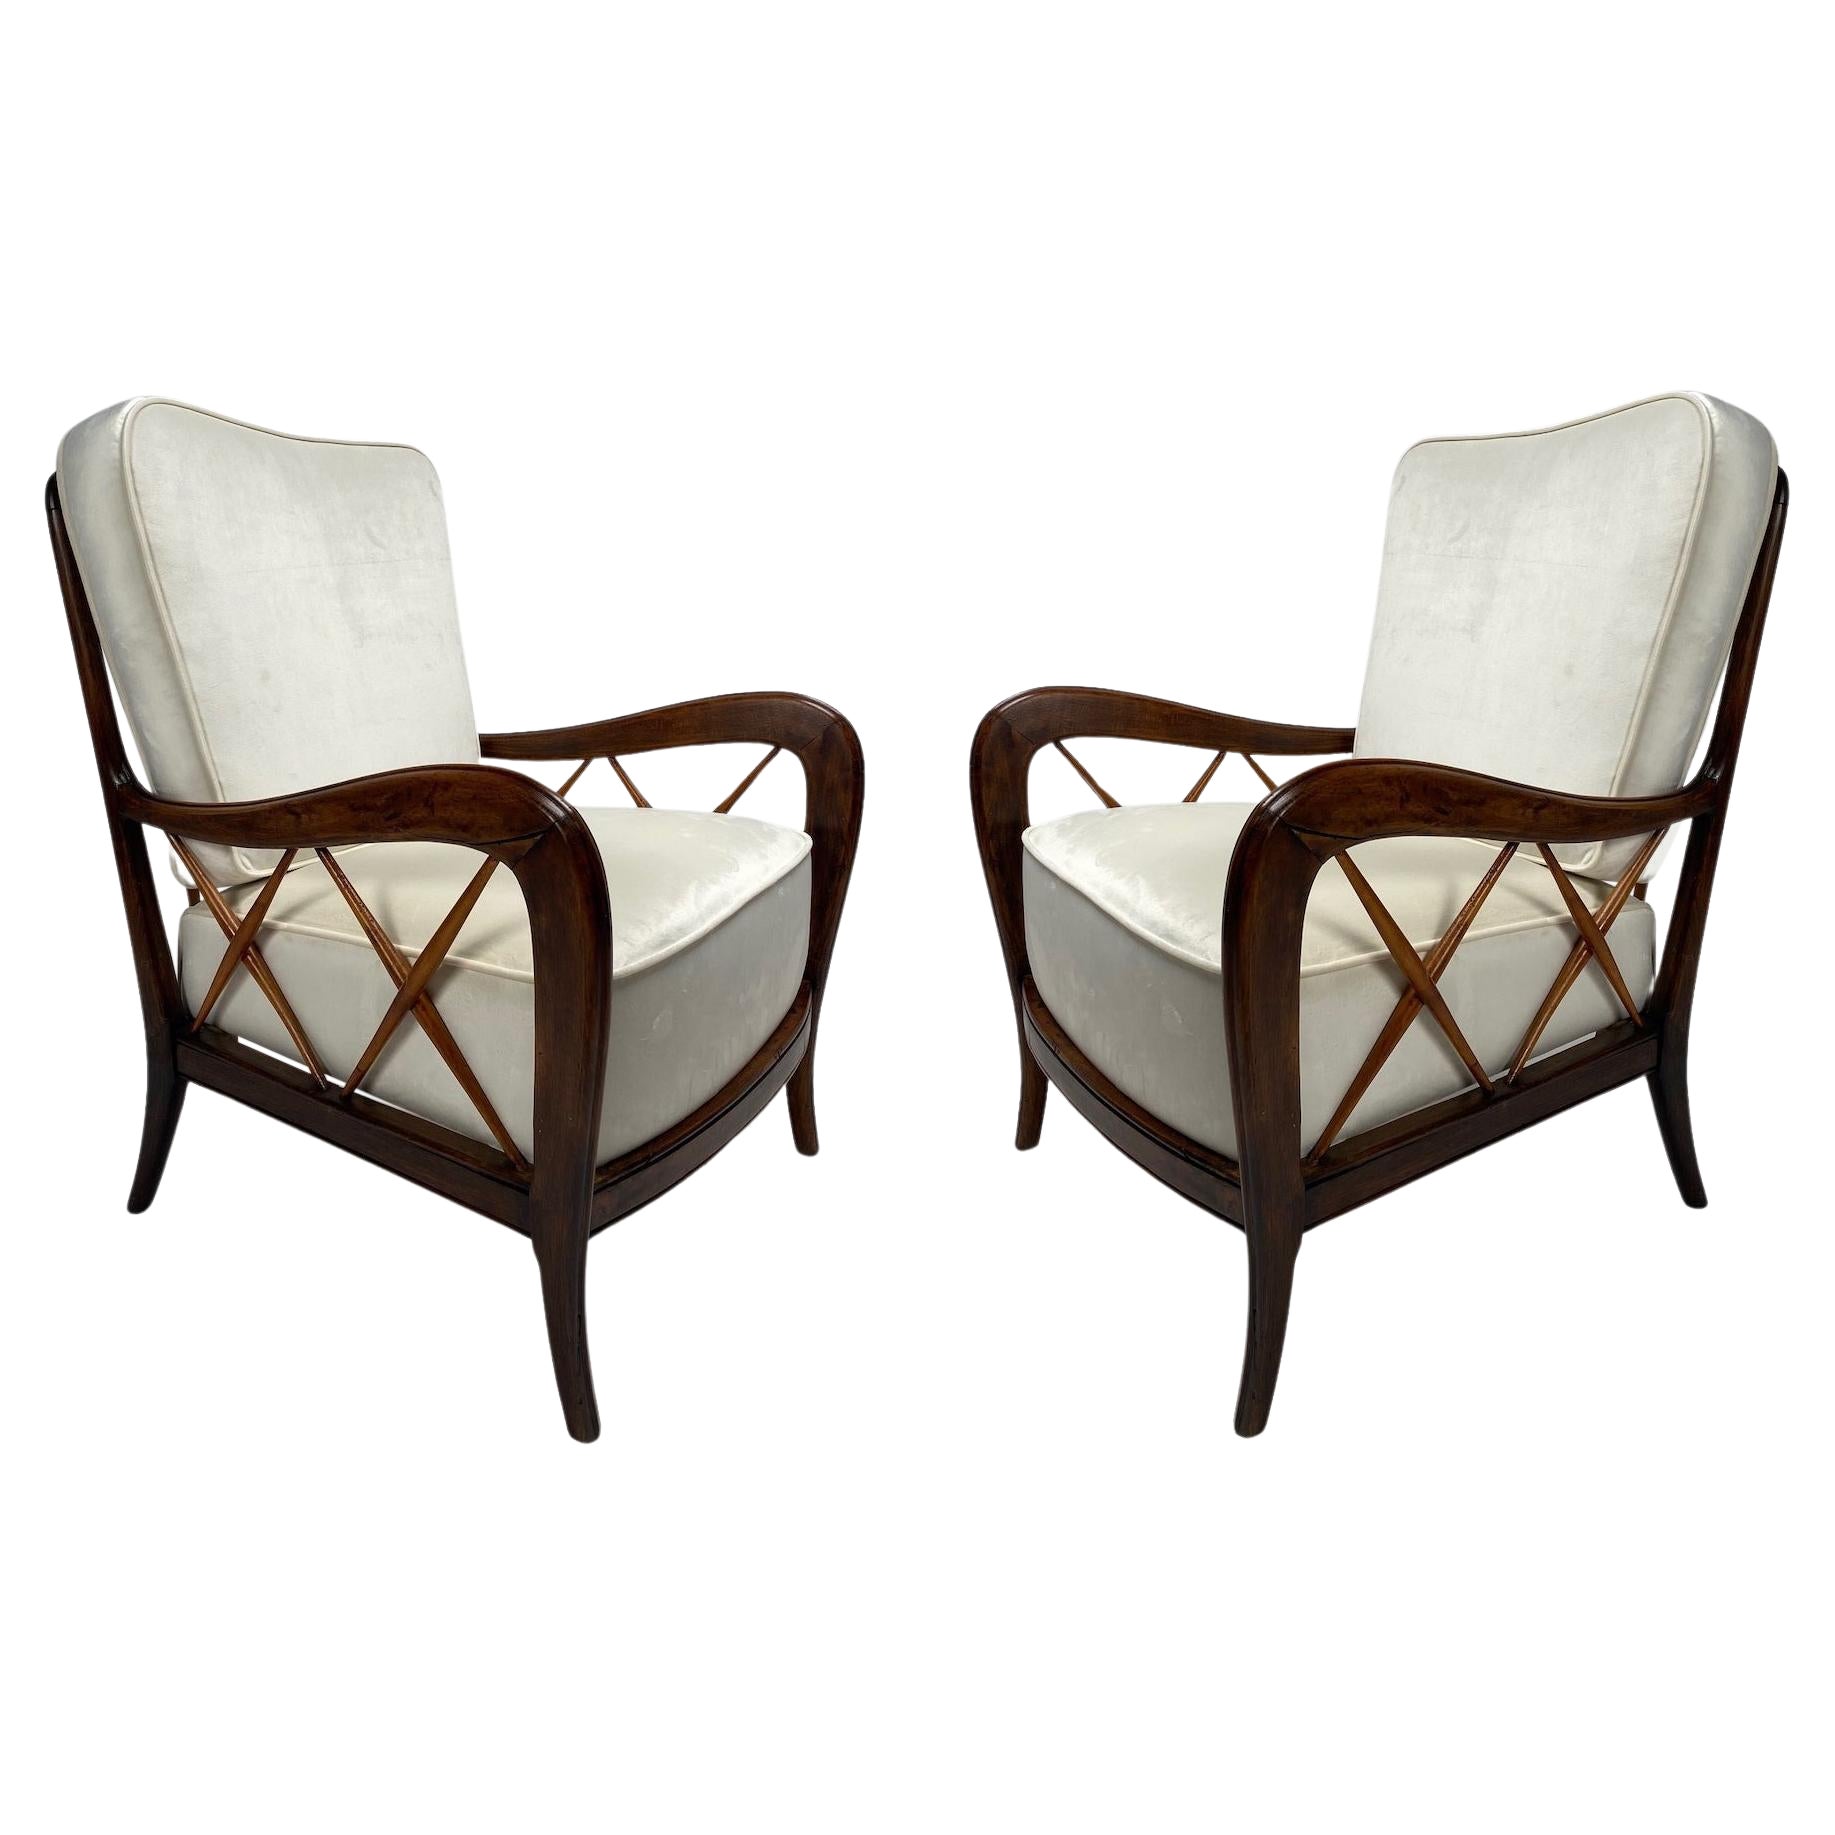 Pair of 1950s armchairs in the style of Paolo Buffa, Italy, 1950s For Sale